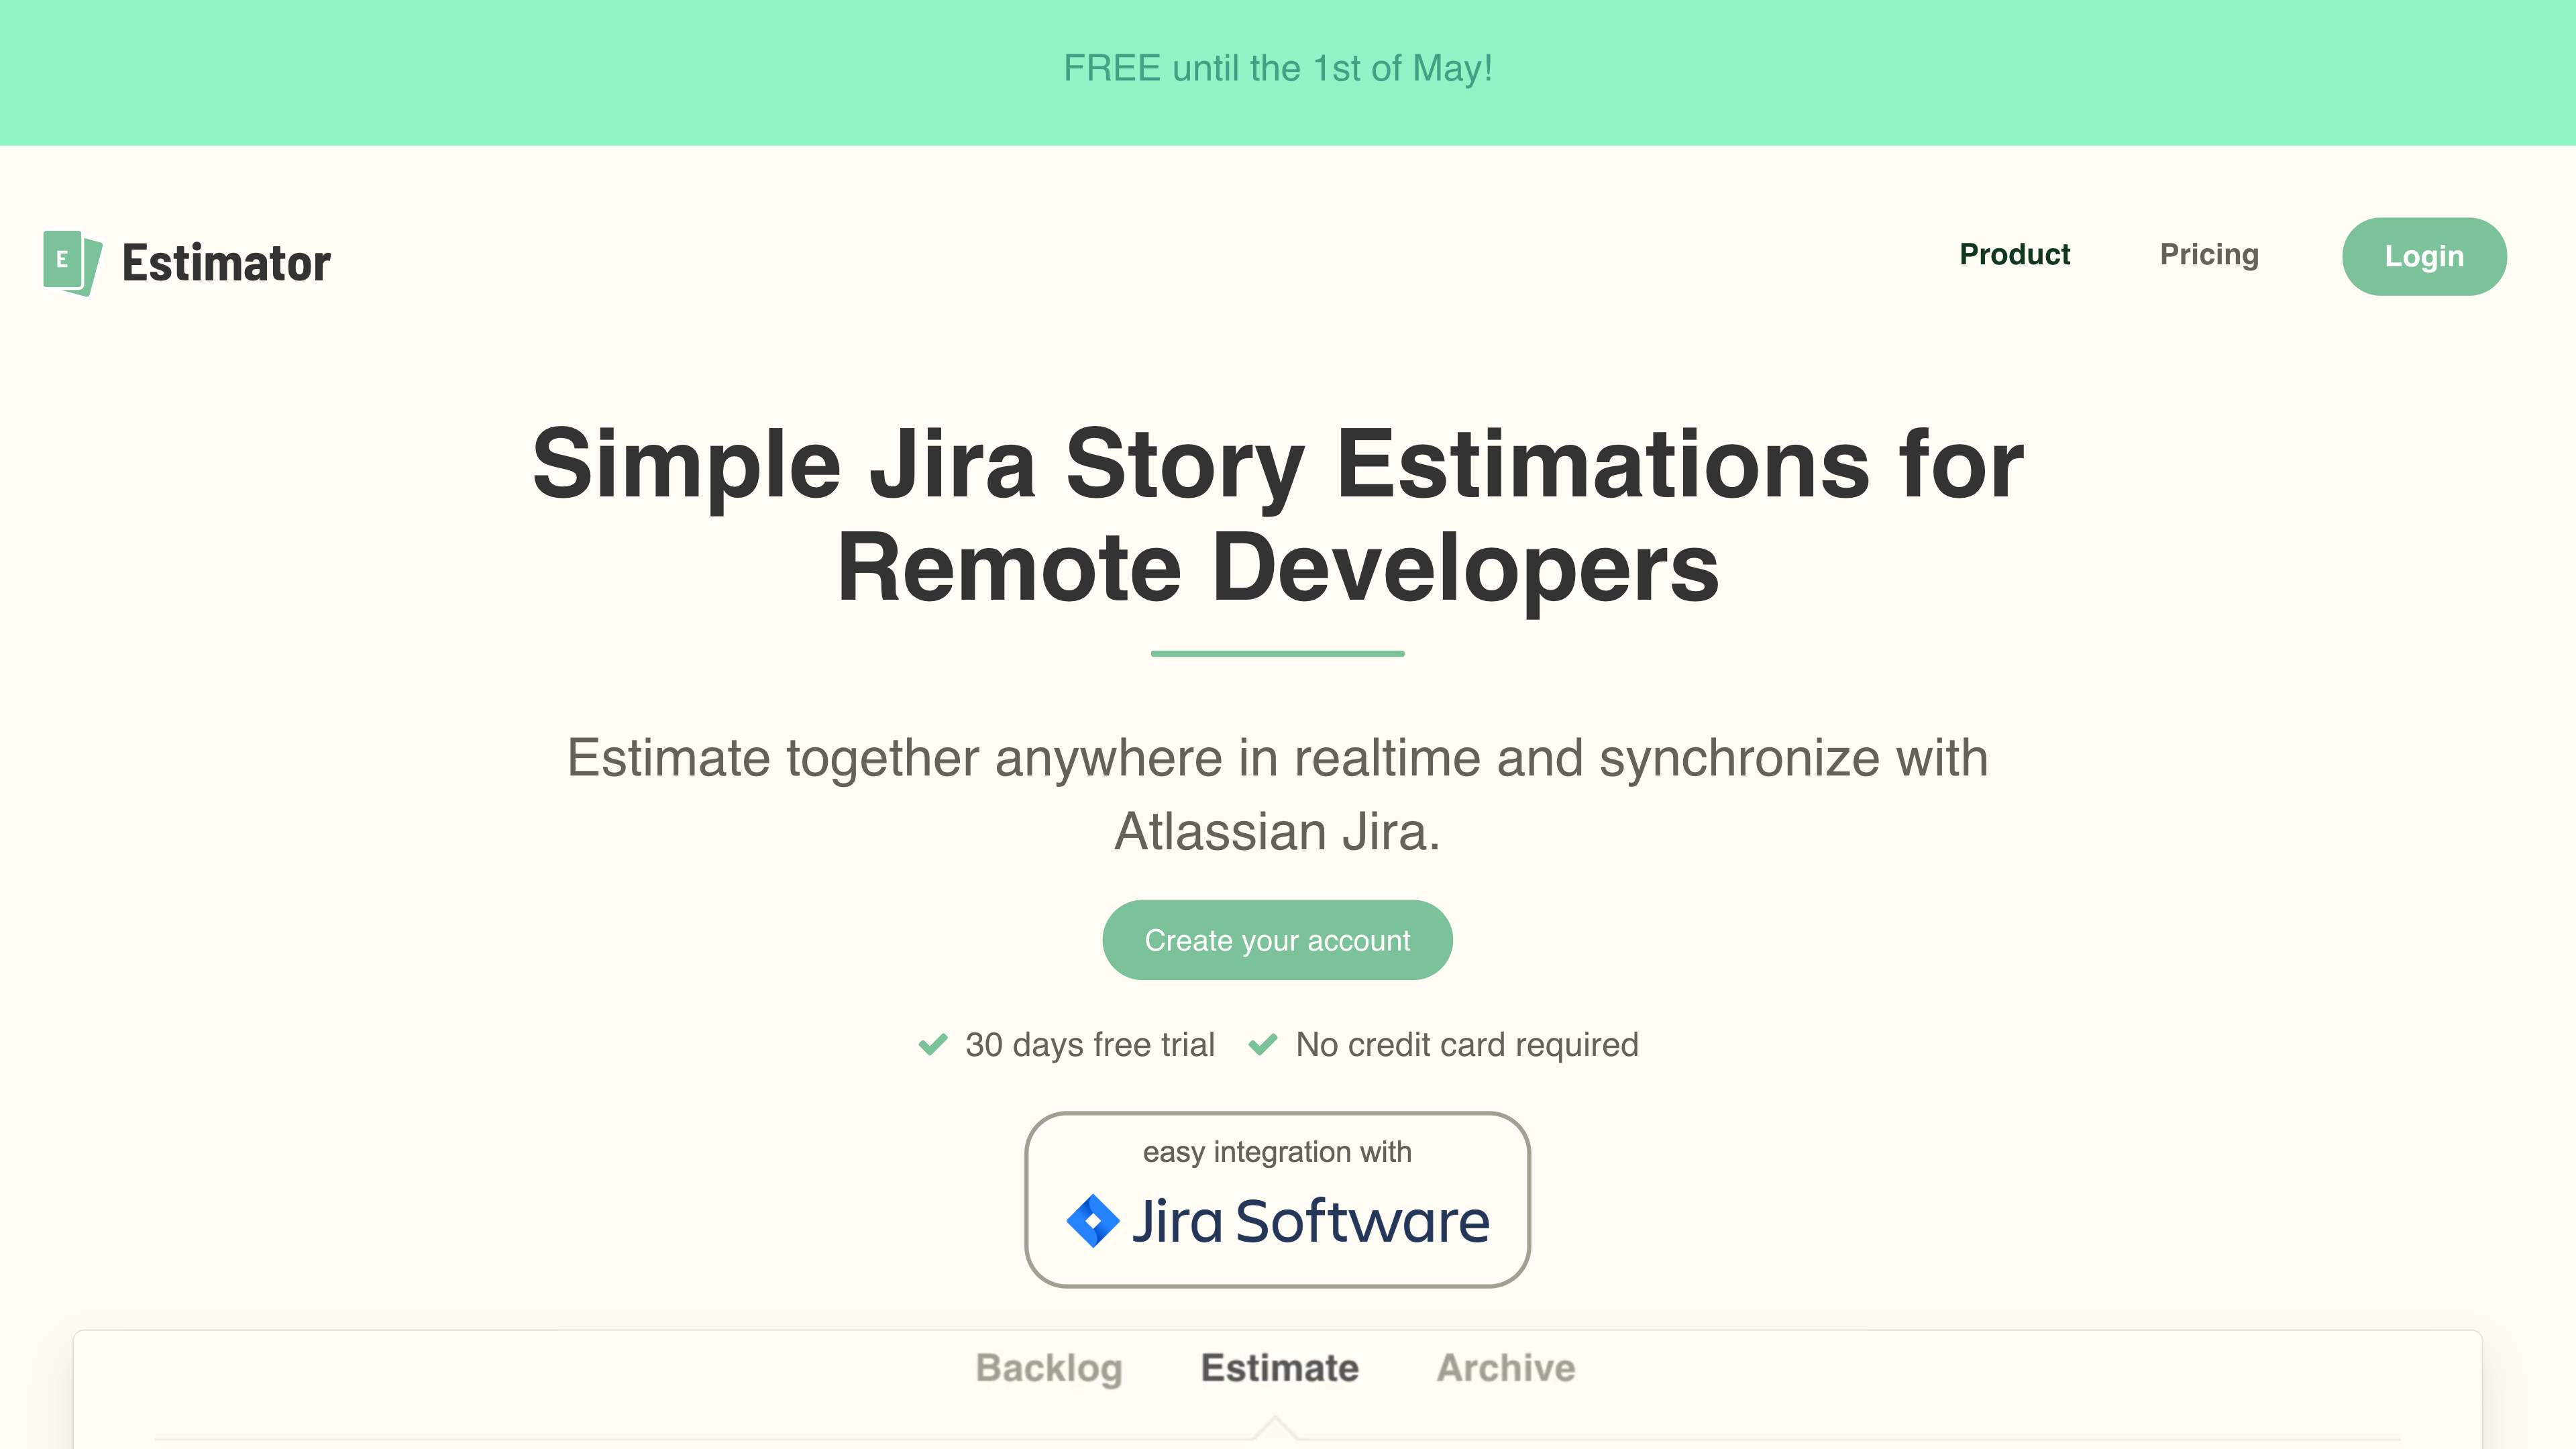 Find detailed information about Estimator for Jira